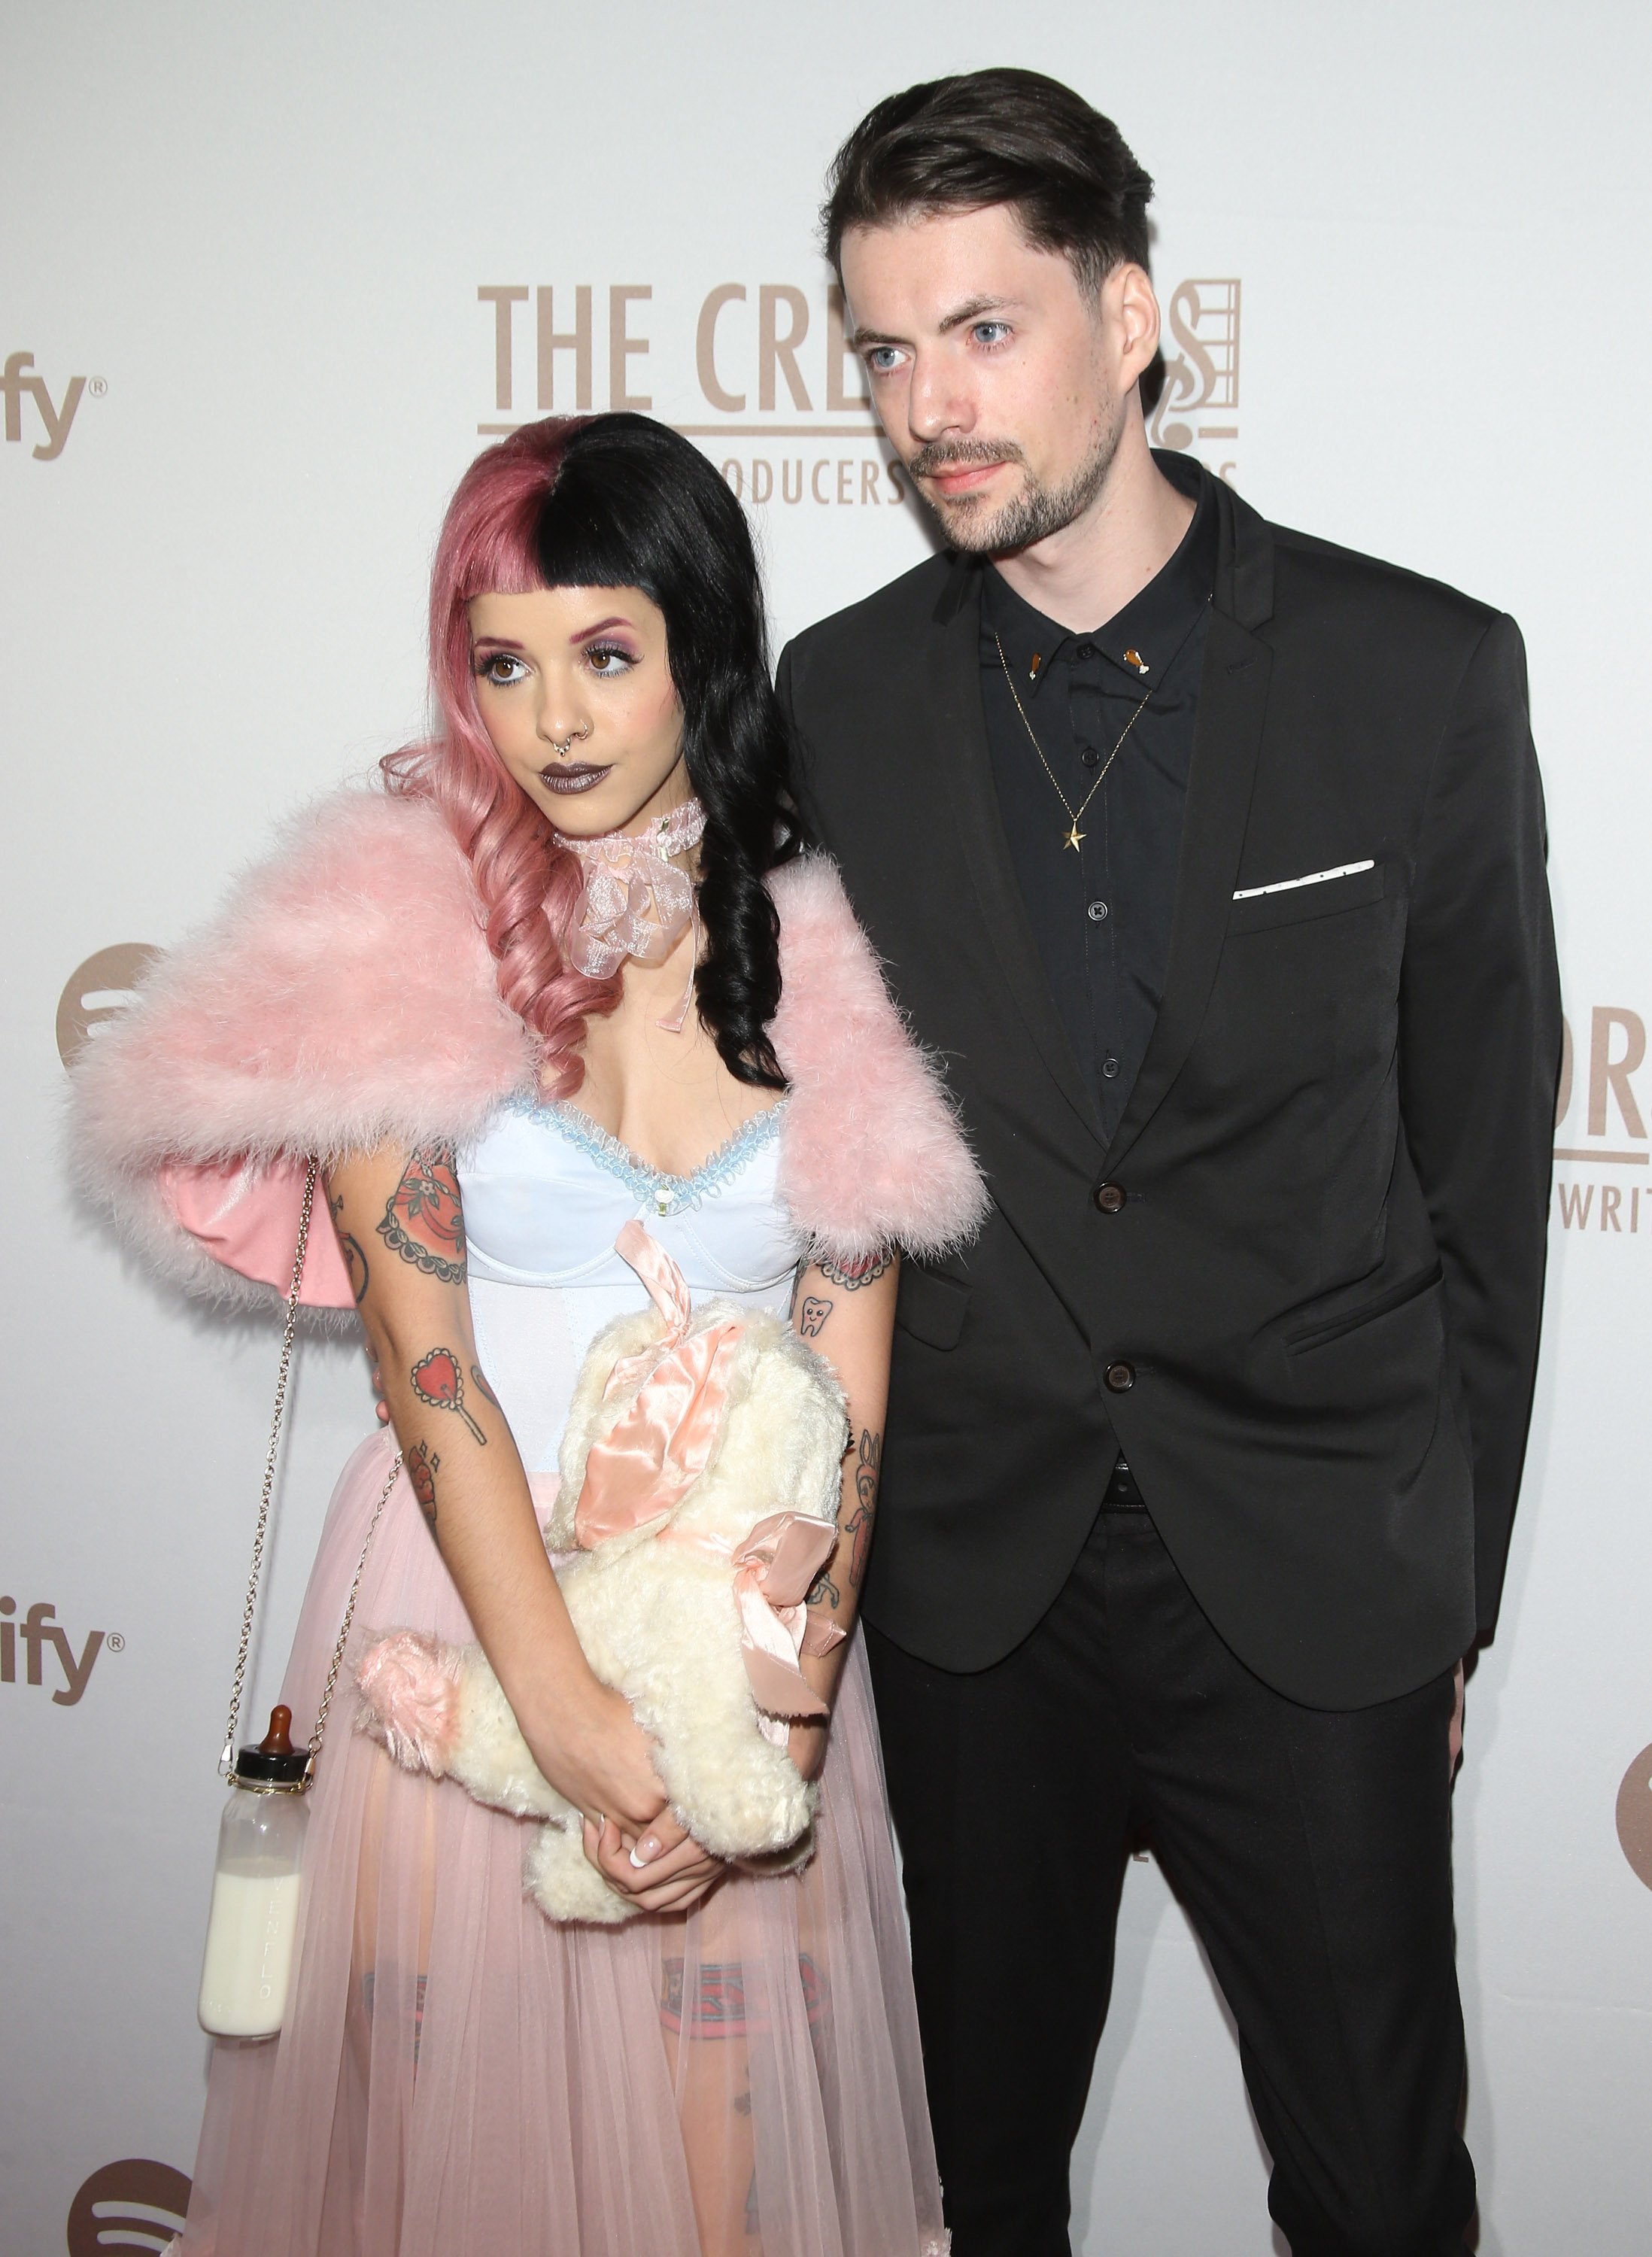 Melanie Martinez's Boyfriend is Also Connected to Music Facts about